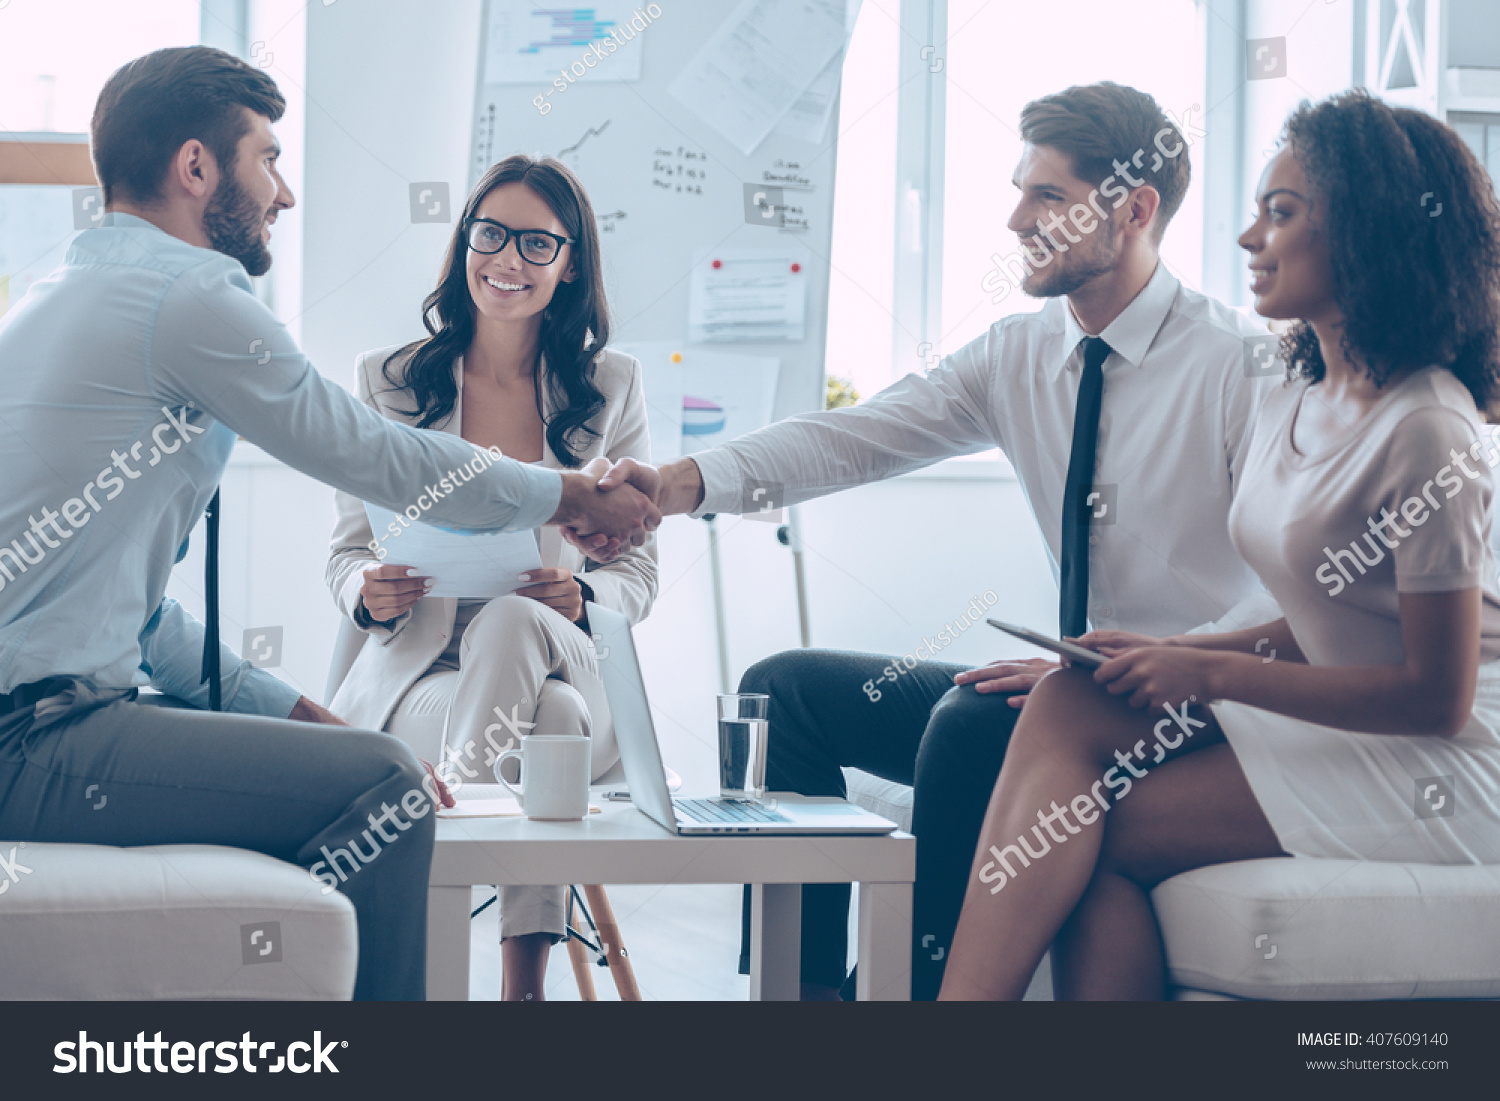 Welcome on board! Two handsome men shaking hands with smile while sitting on the couch at office with their coworkers #407609140